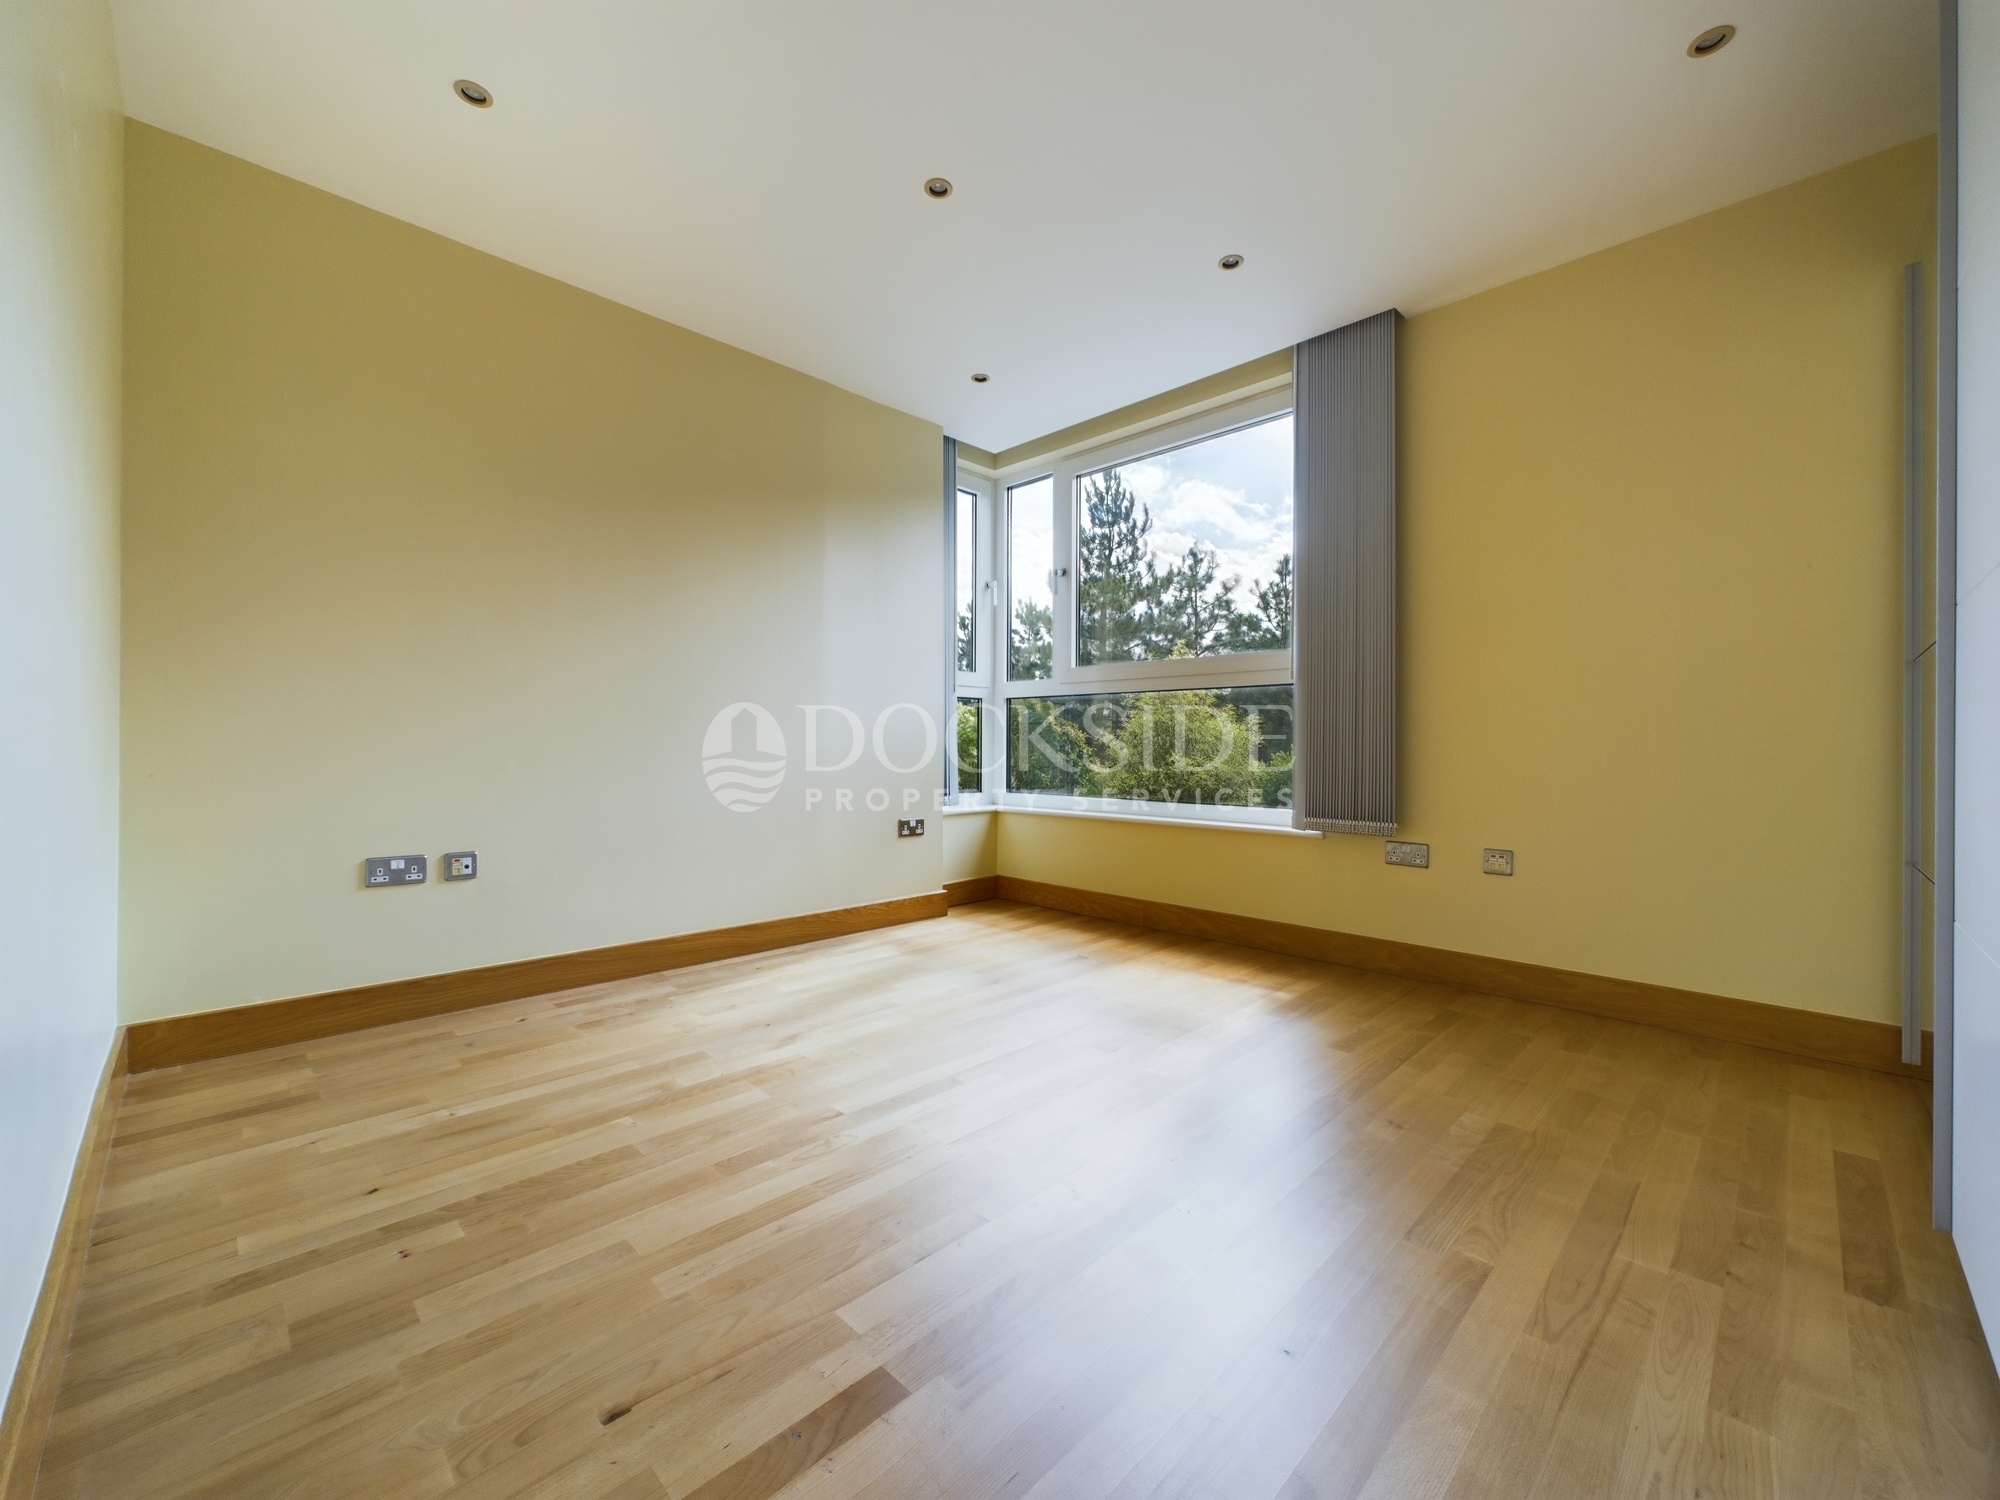 5 bed to rent in Pier Road, Gillingham  - Property Image 5